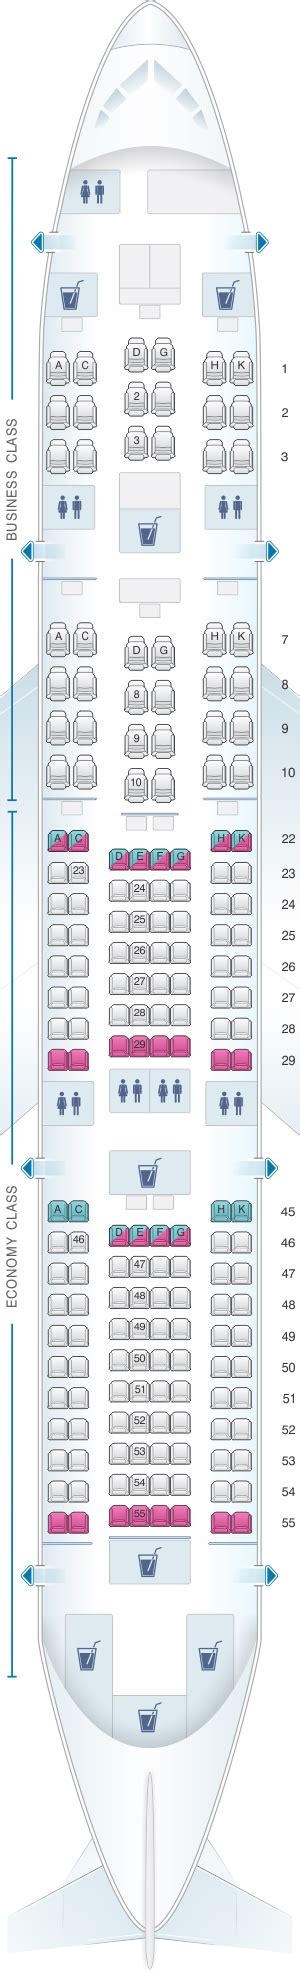 jal boeing 787-8 seat map